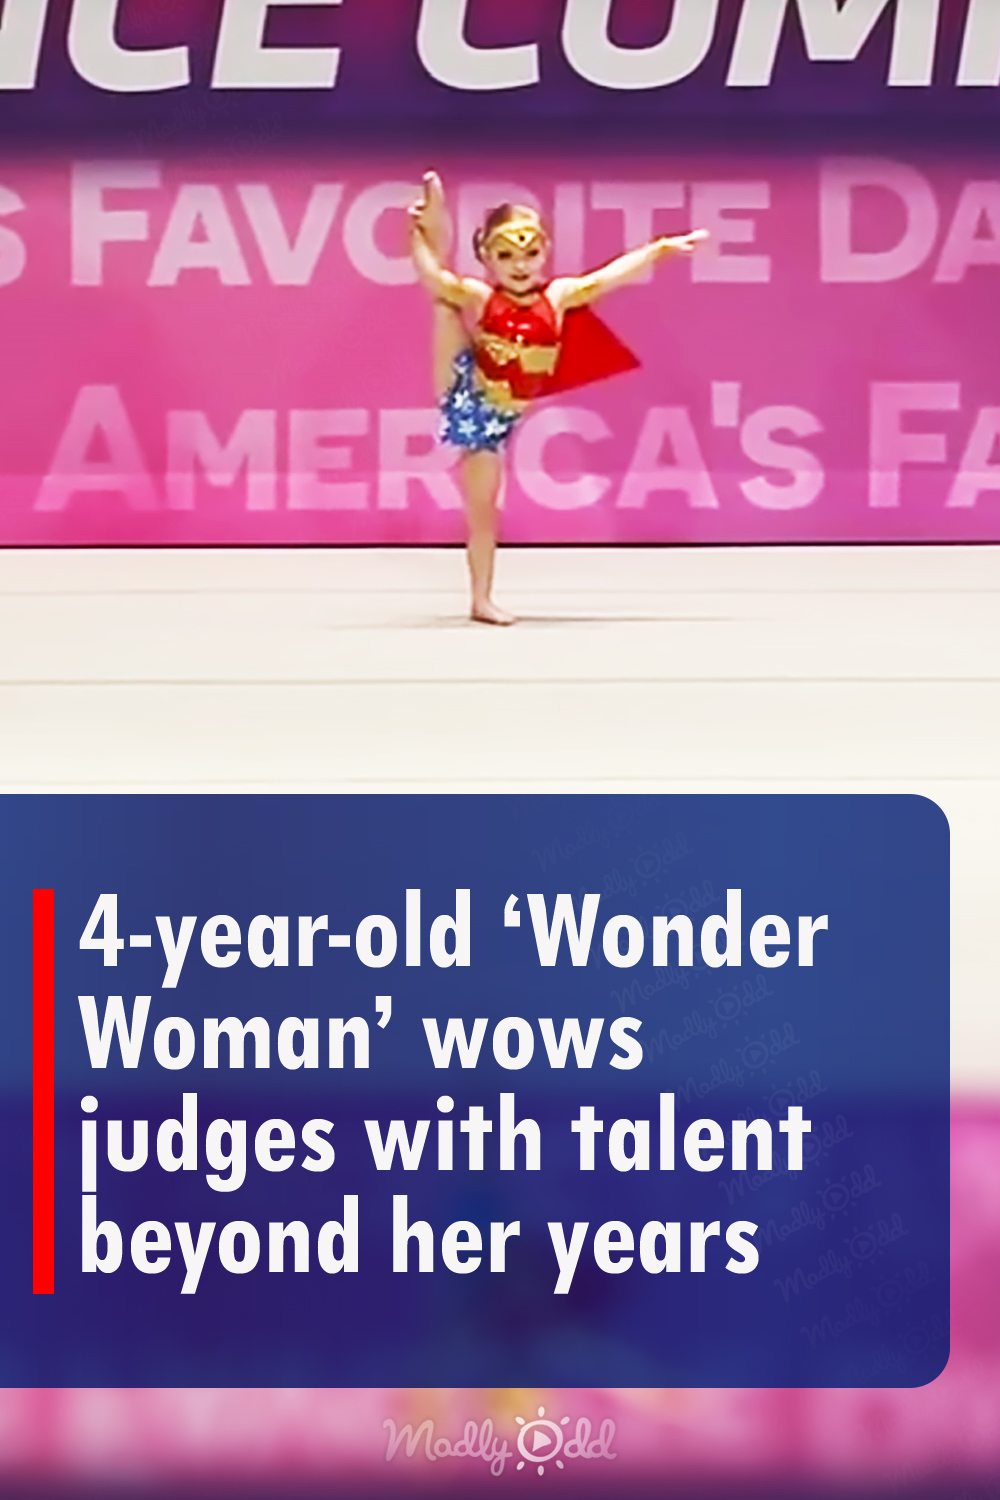 4-year-old ‘Wonder Woman’ wows judges with talent beyond her years